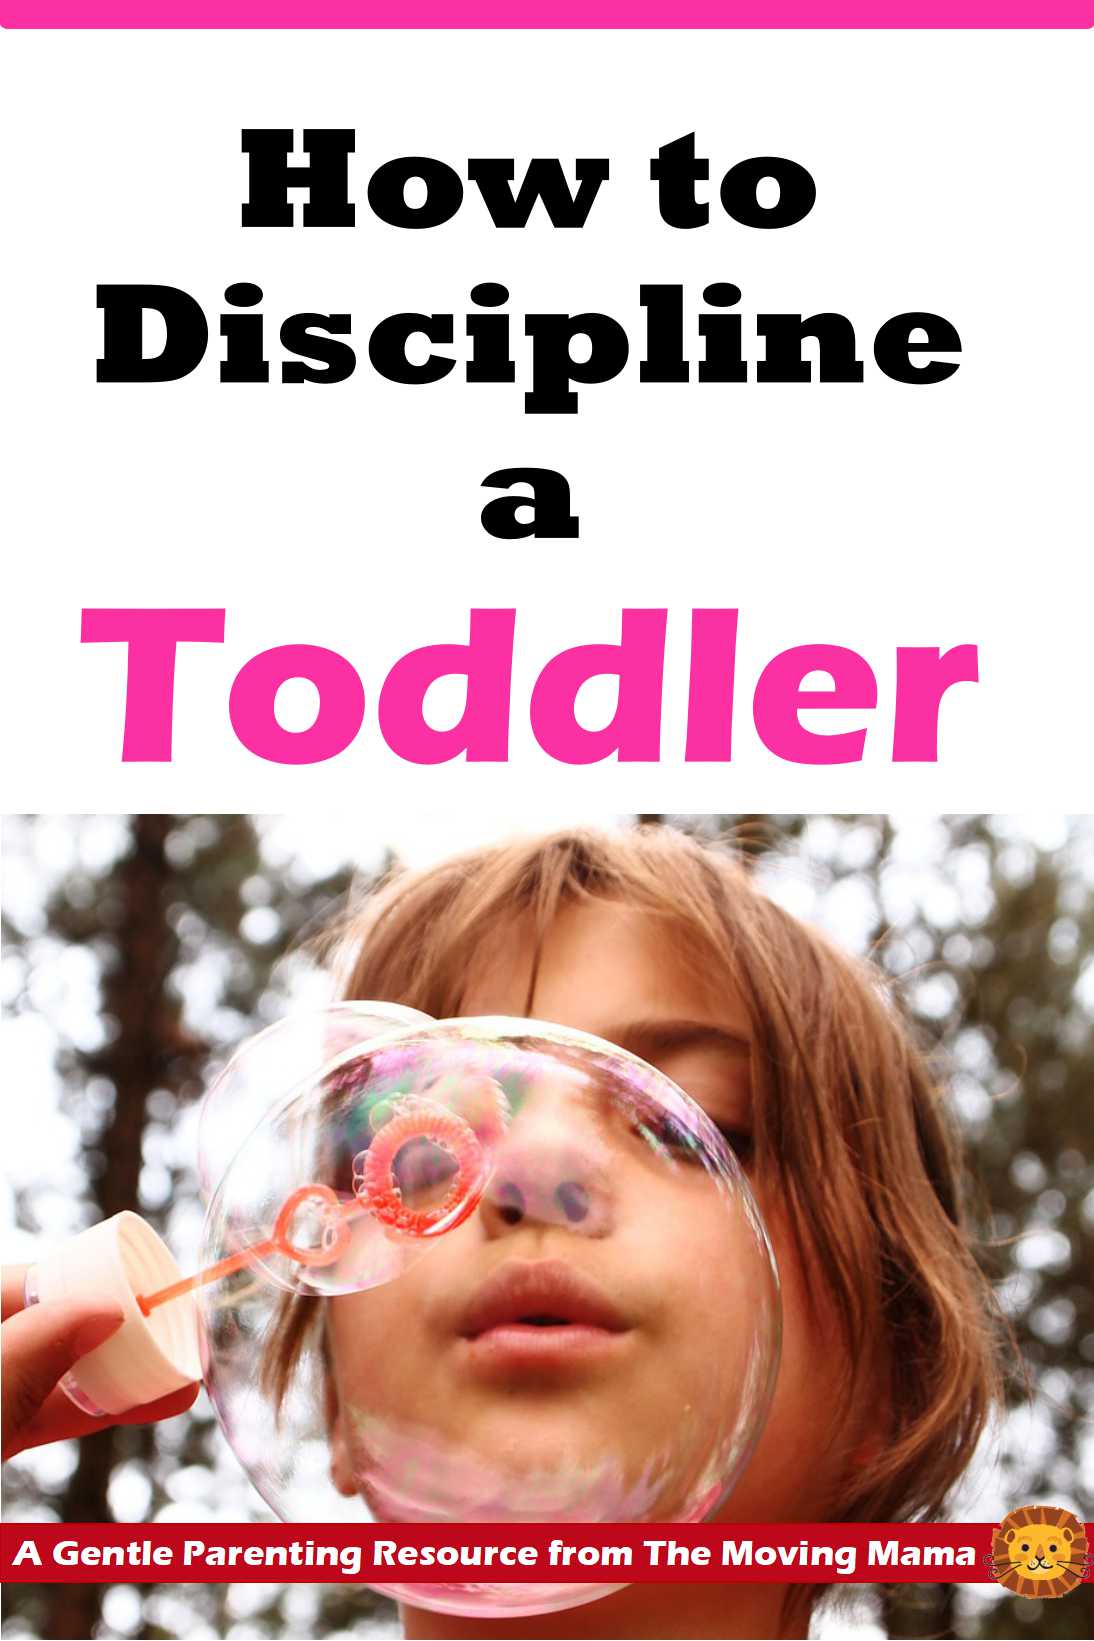 Are you trying to figure out how to discipline your toddler? You need effective strategies when it comes to discipline. Click here to learn how to discipline a toddler. #toddlerdiscipline #gentleparenting #discipline #parenting #toddlers